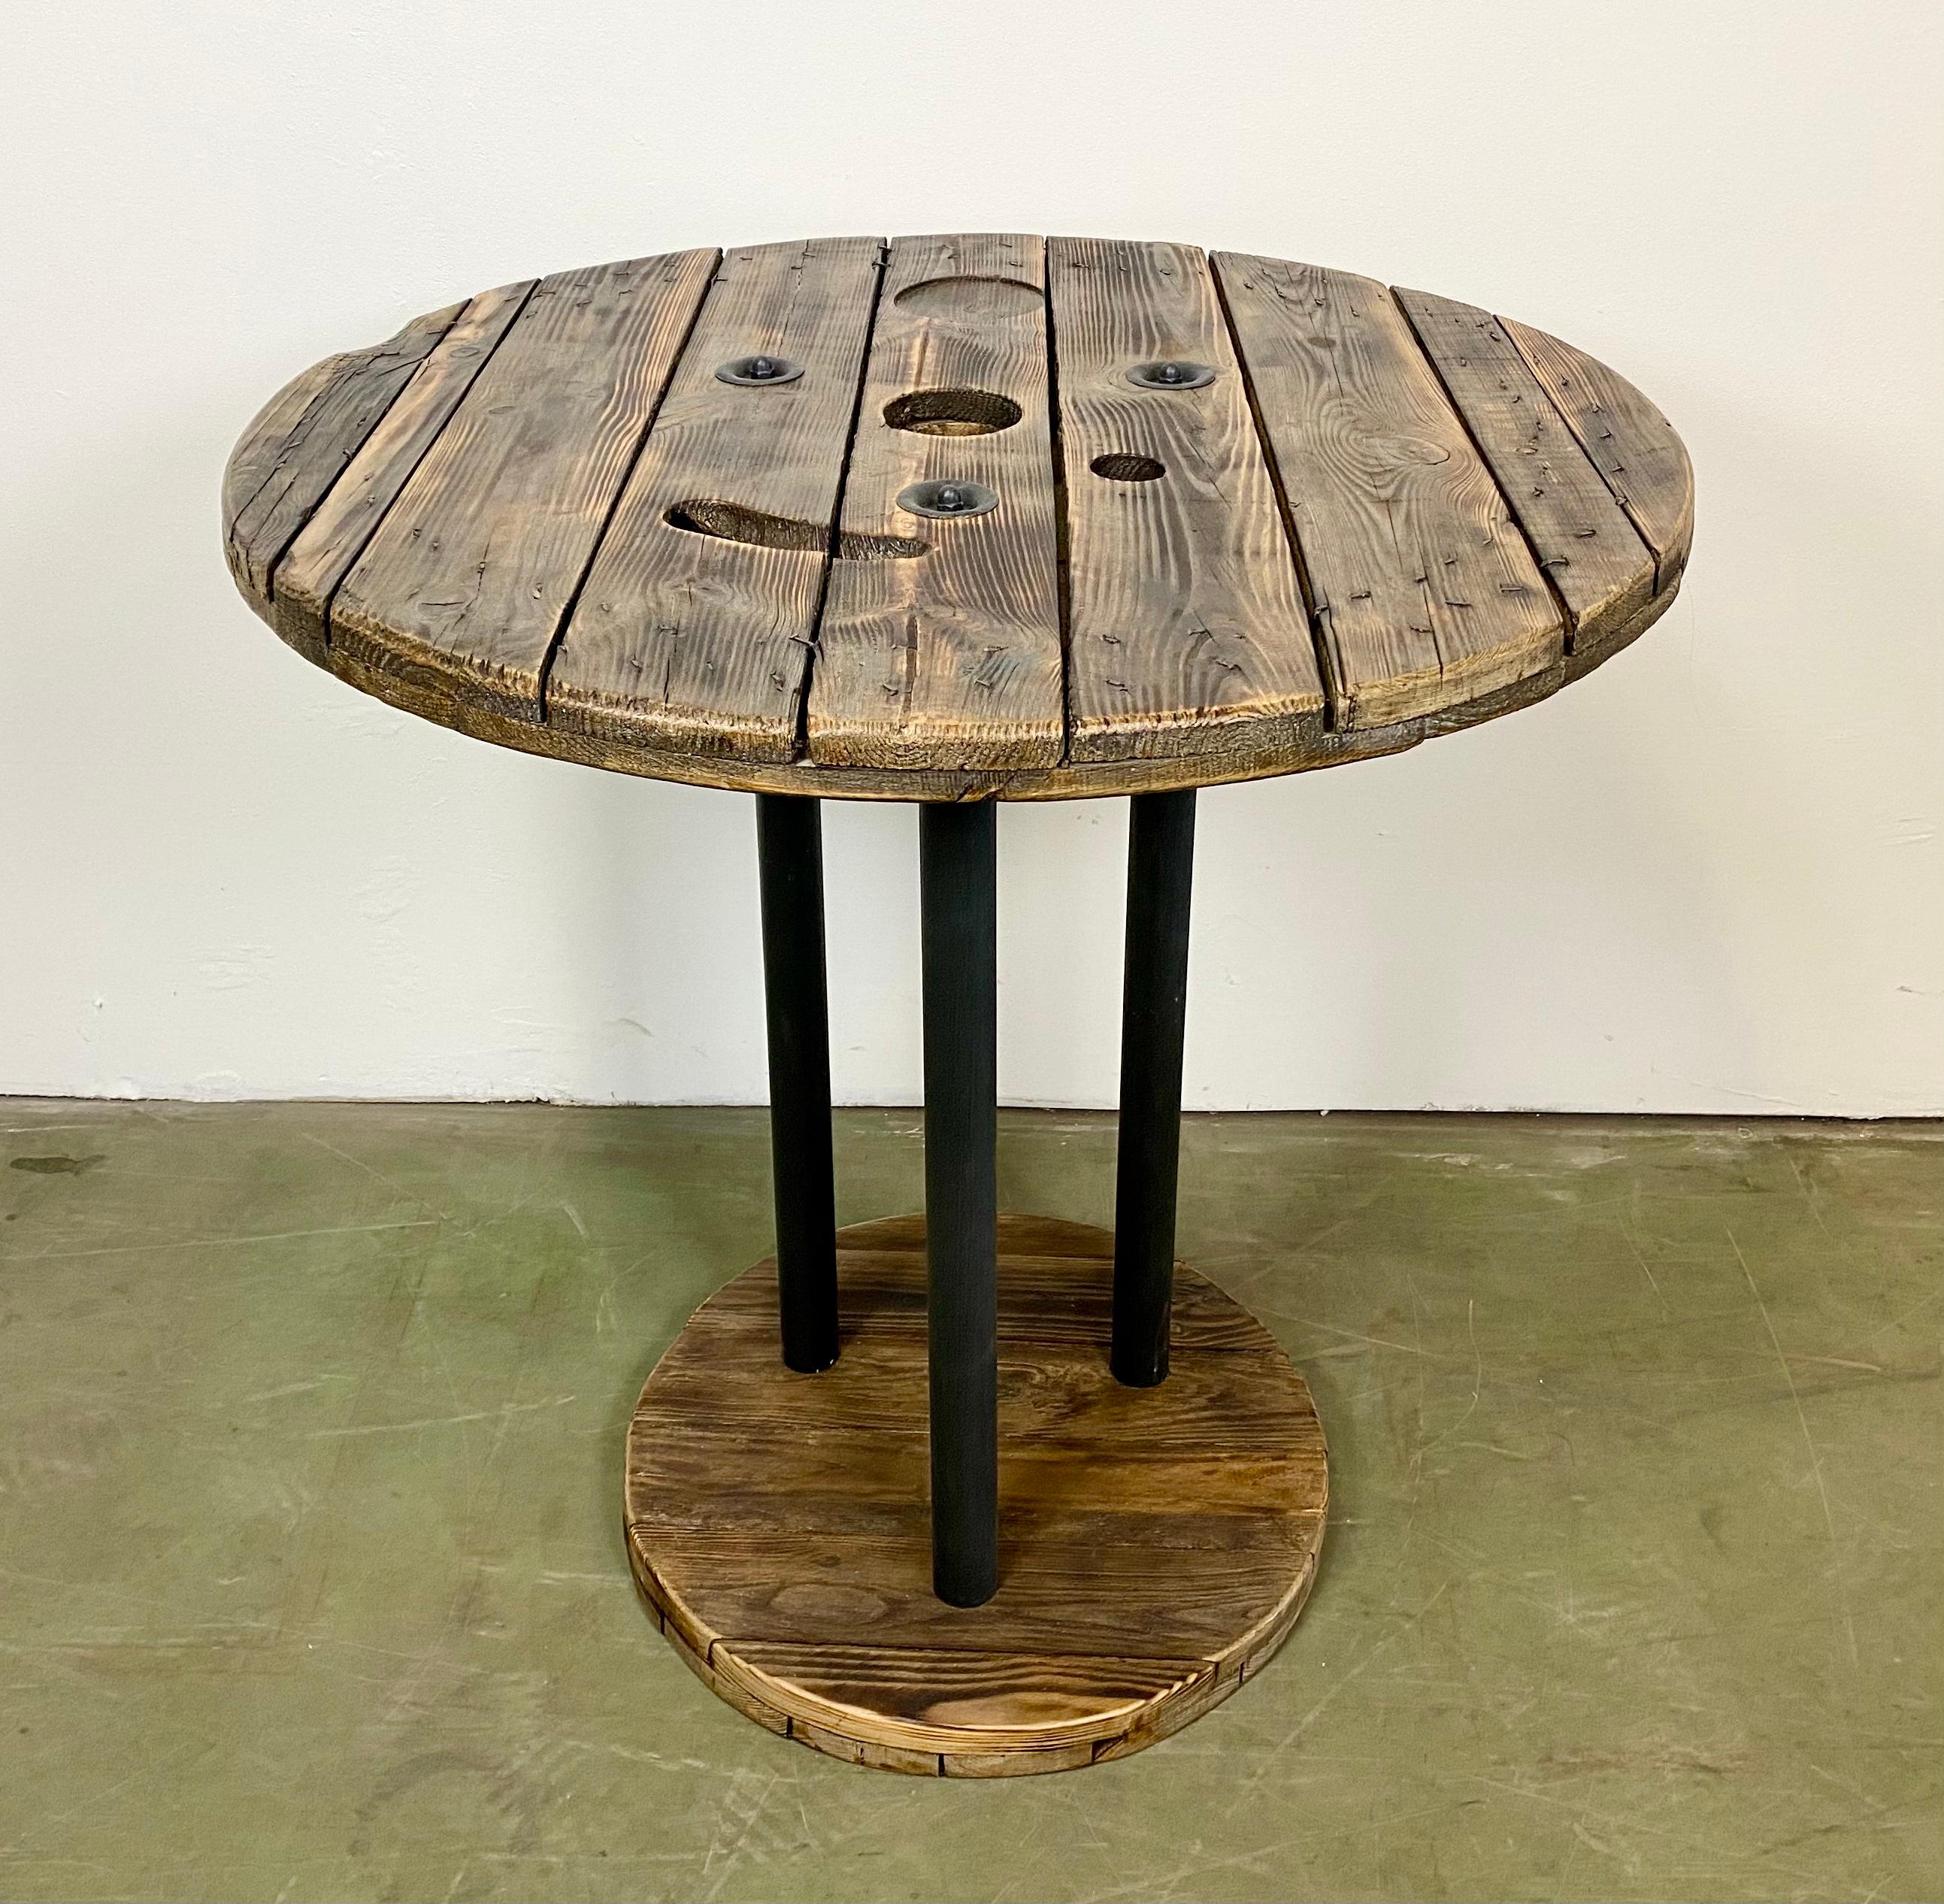 Vintage Industrial Circle Coffee Table, 1960s In Good Condition For Sale In Kojetice, CZ